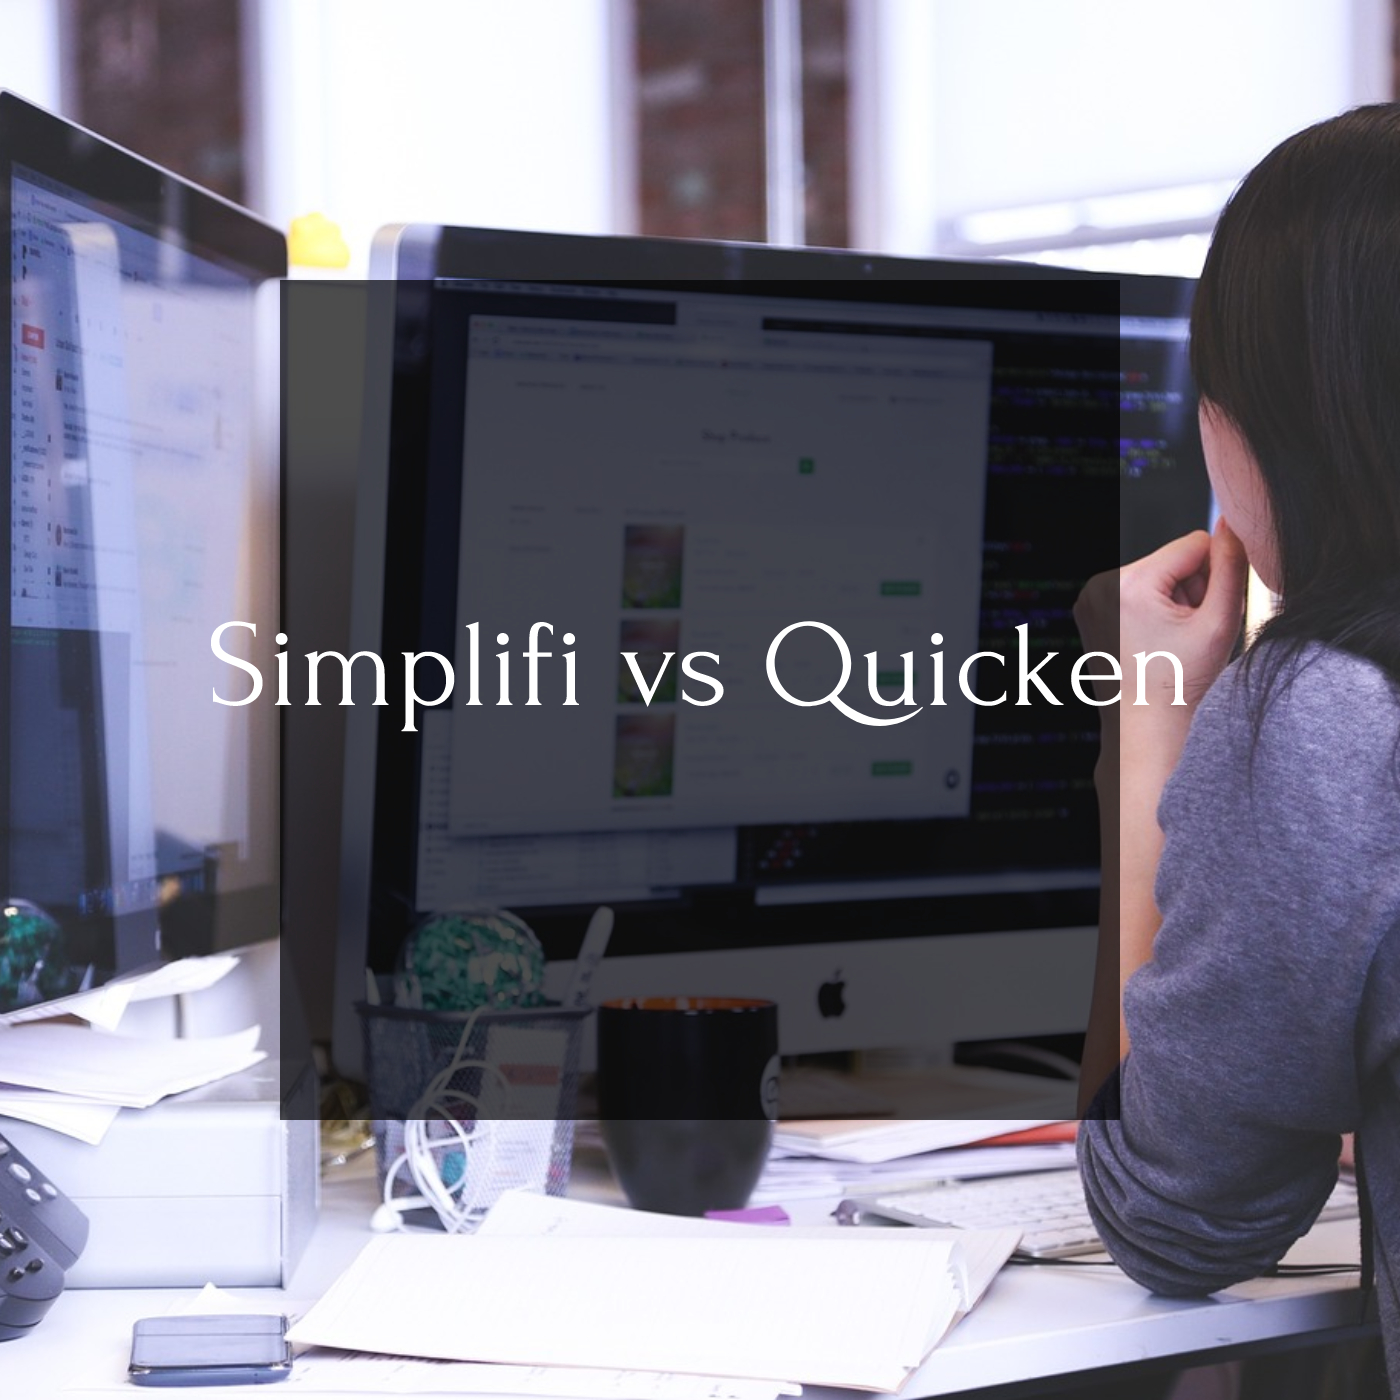 Simplifi vs Quicken: Analyzing Two Financial Management Solutions